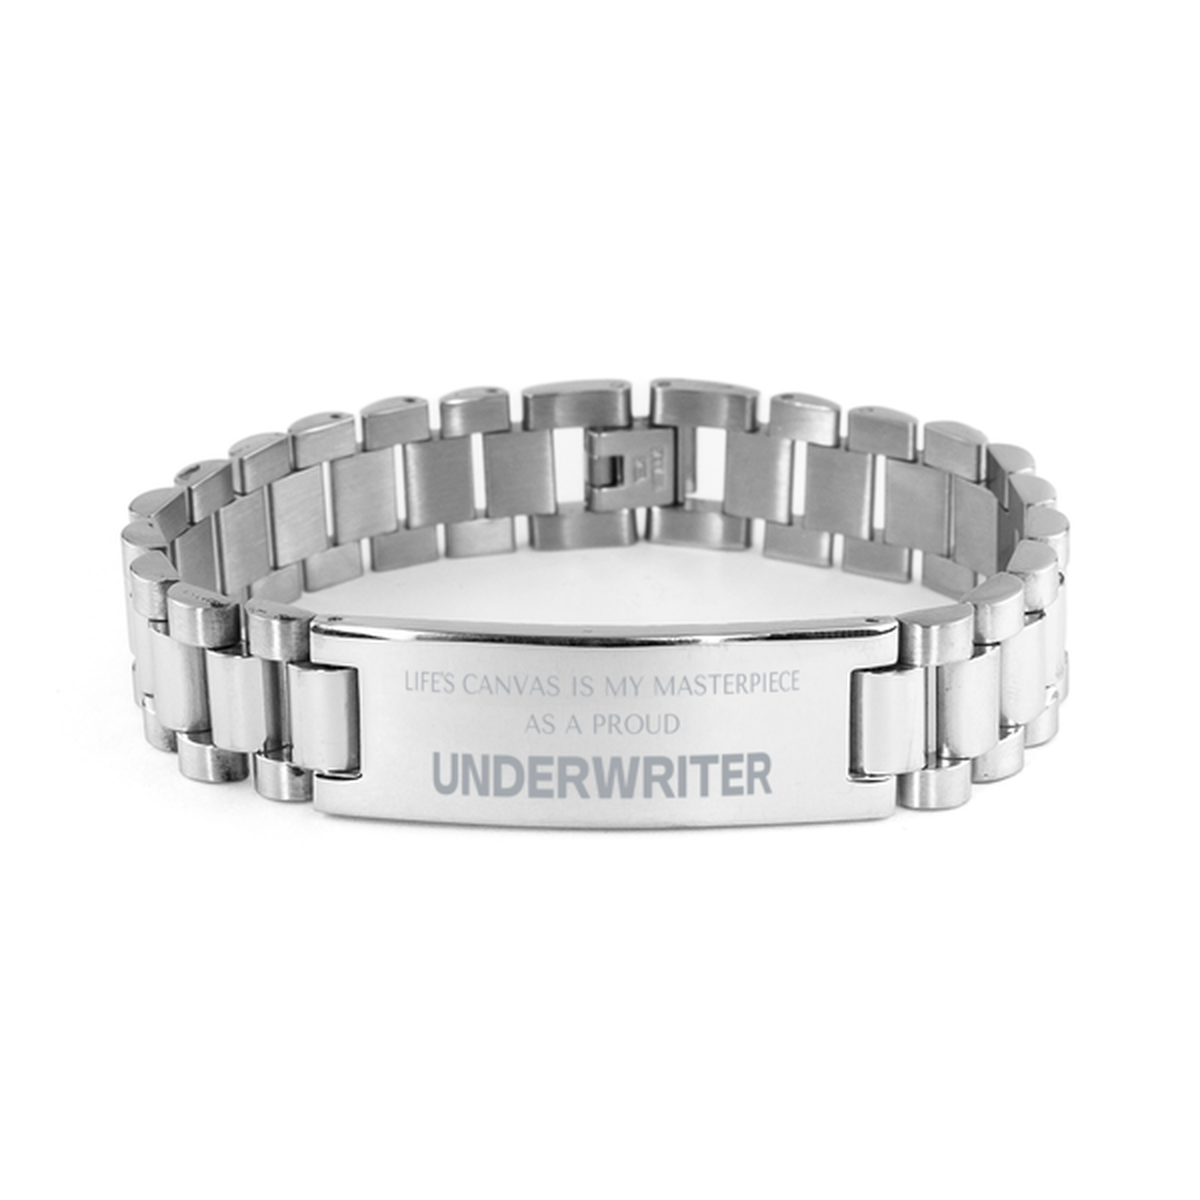 Proud Underwriter Gifts, Life's canvas is my masterpiece, Epic Birthday Christmas Unique Ladder Stainless Steel Bracelet For Underwriter, Coworkers, Men, Women, Friends